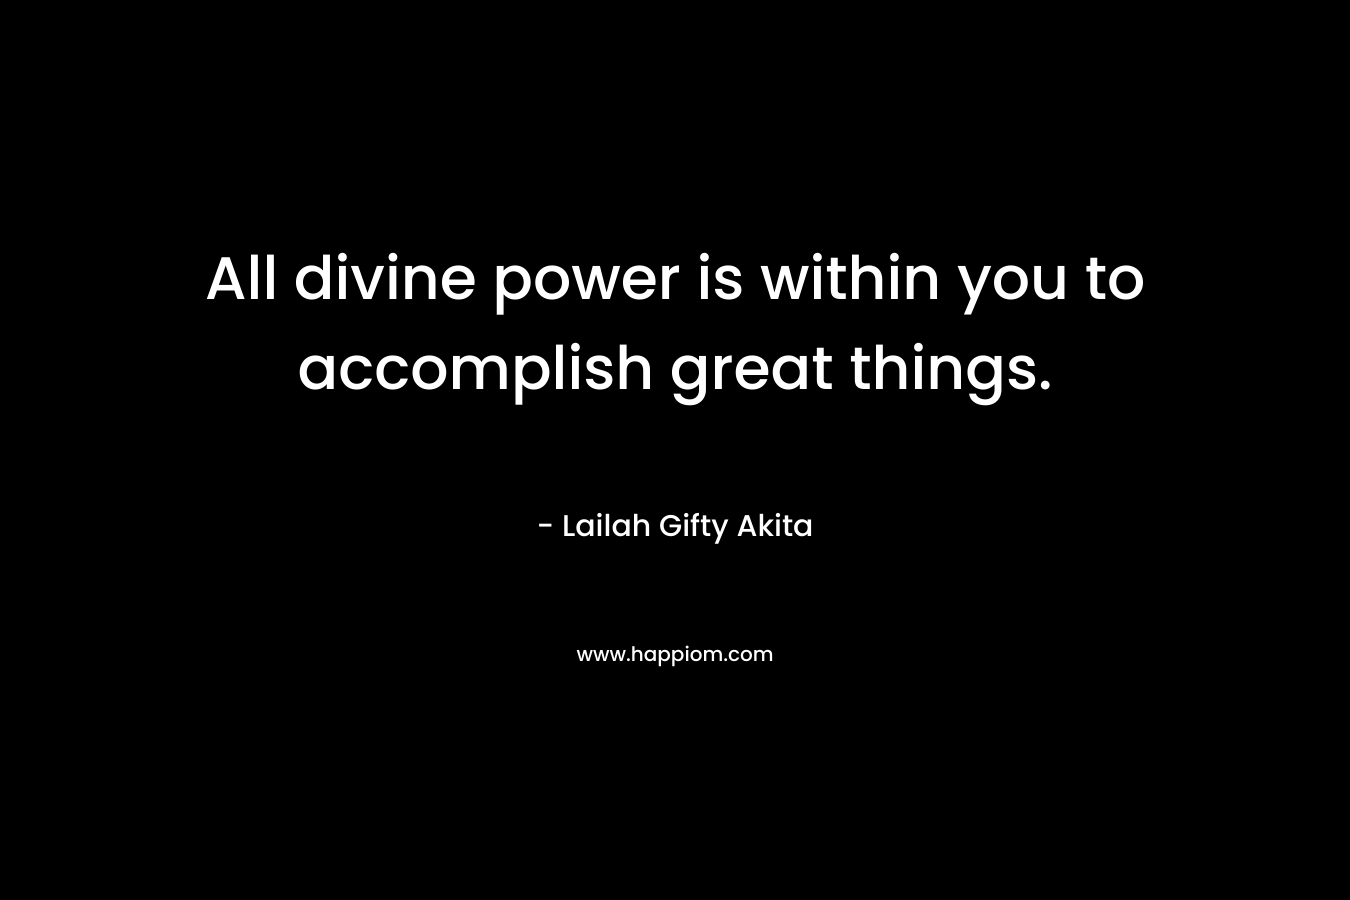 All divine power is within you to accomplish great things.